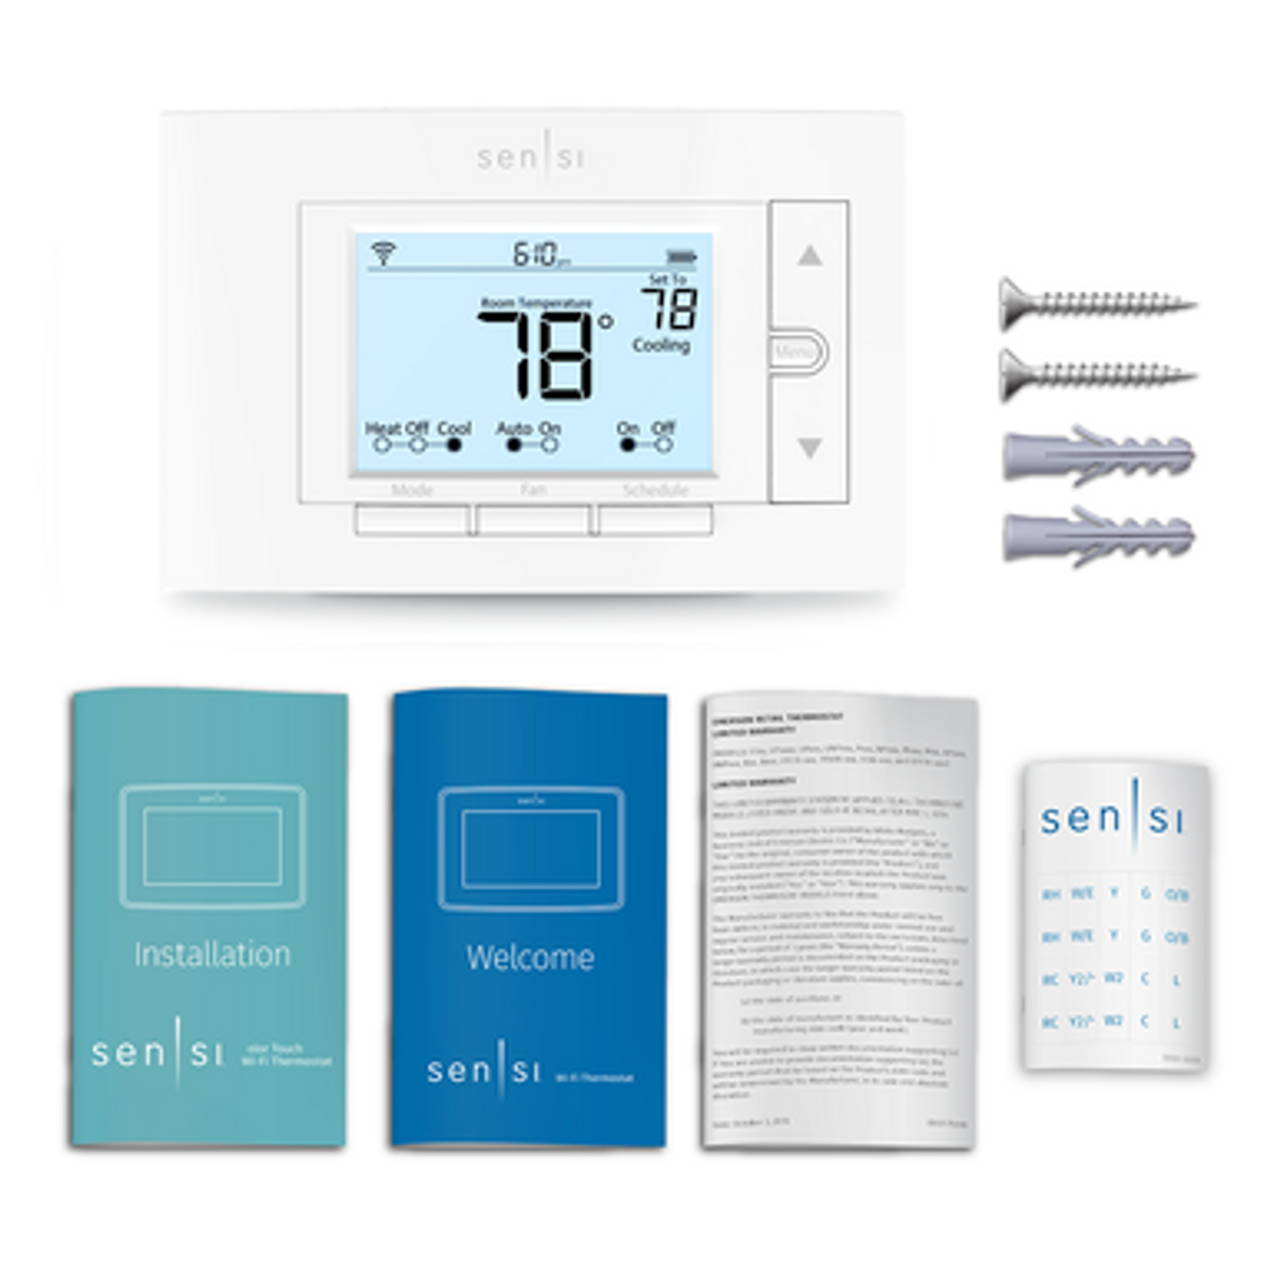 Sensi Smart Thermostat set to 78 Cooling with screws, anchors, and manual.